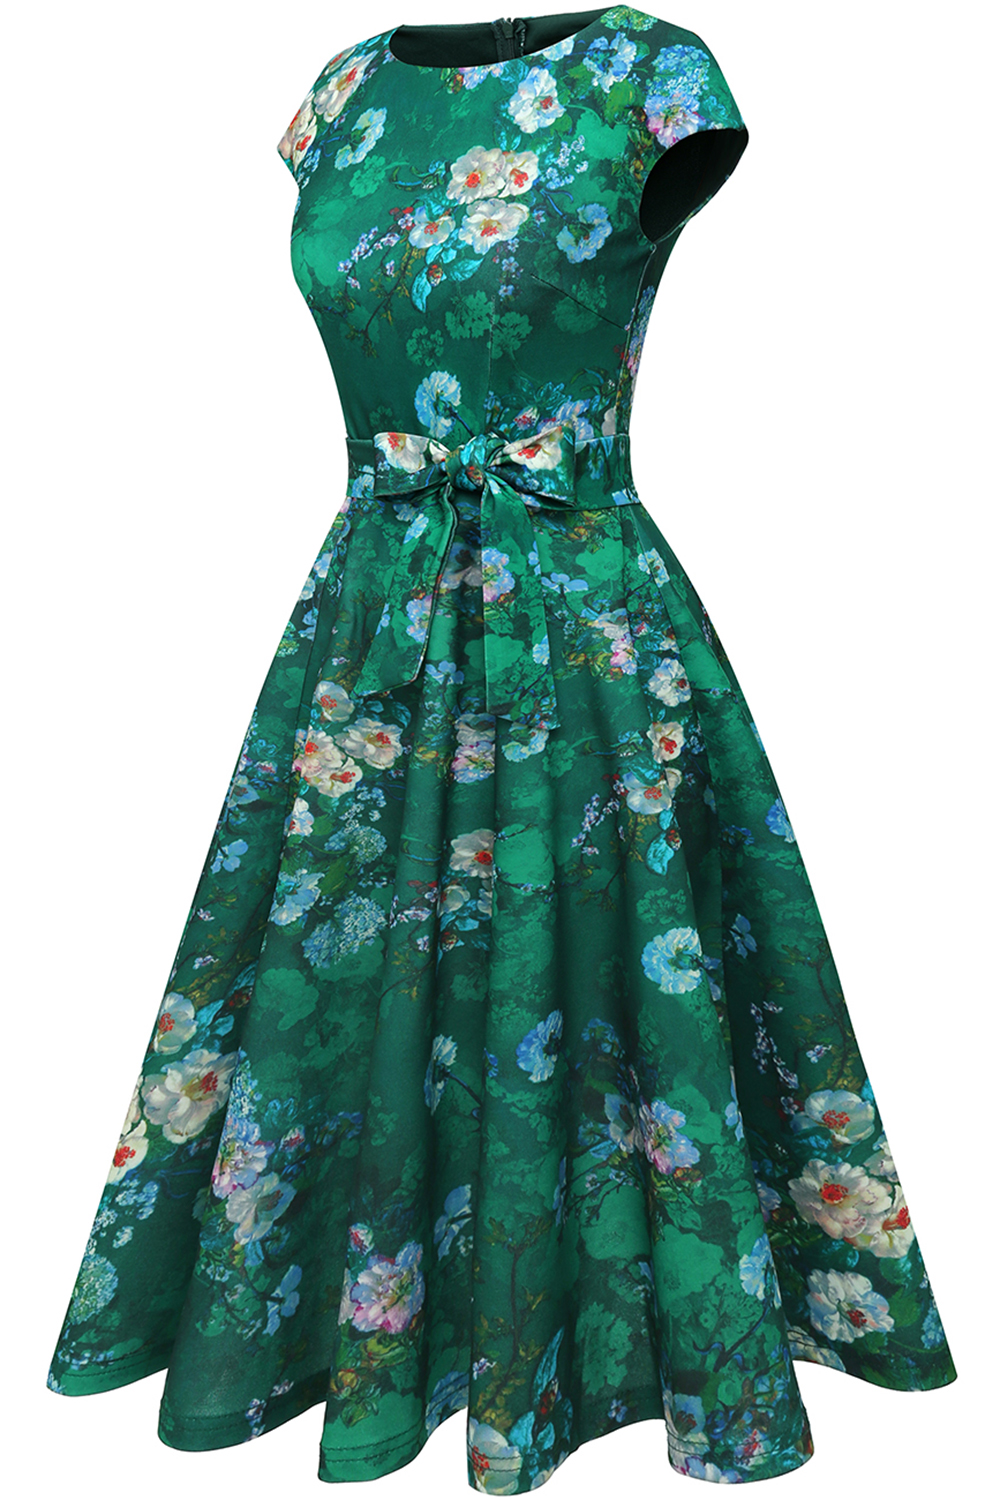 Green Flower 2024 Women's Floral Cocktail, Tea Length Wedding Guest Dresses - Vintage, Graduation, Prom & Bridesmaid with Cap Sleeves